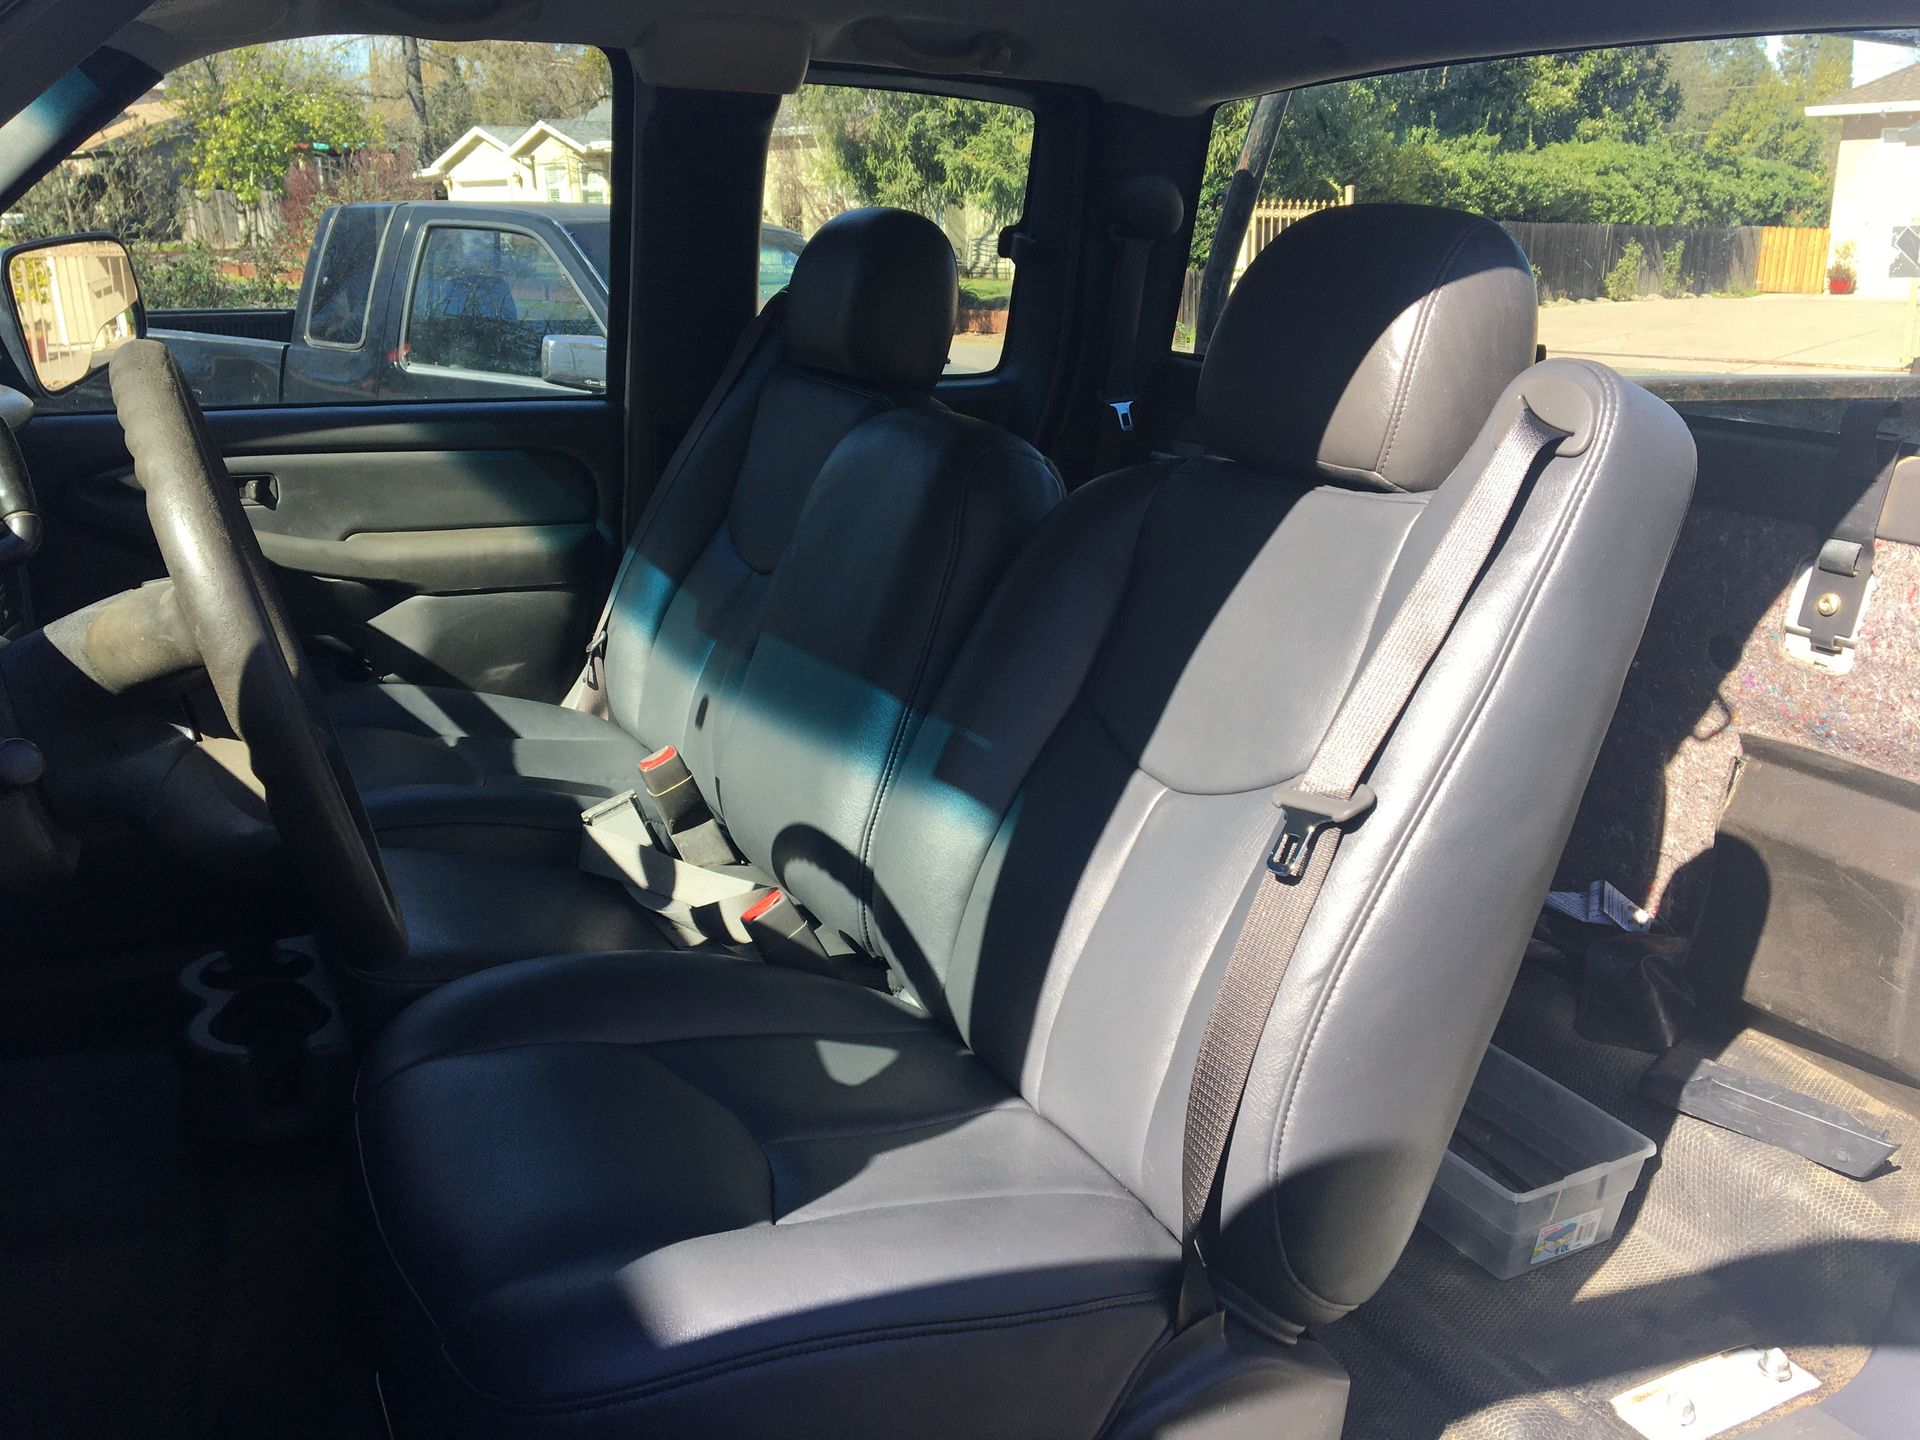 After Auto Upholstery - Fair Oaks, CA - Groom's Auto Trim and Upholstery